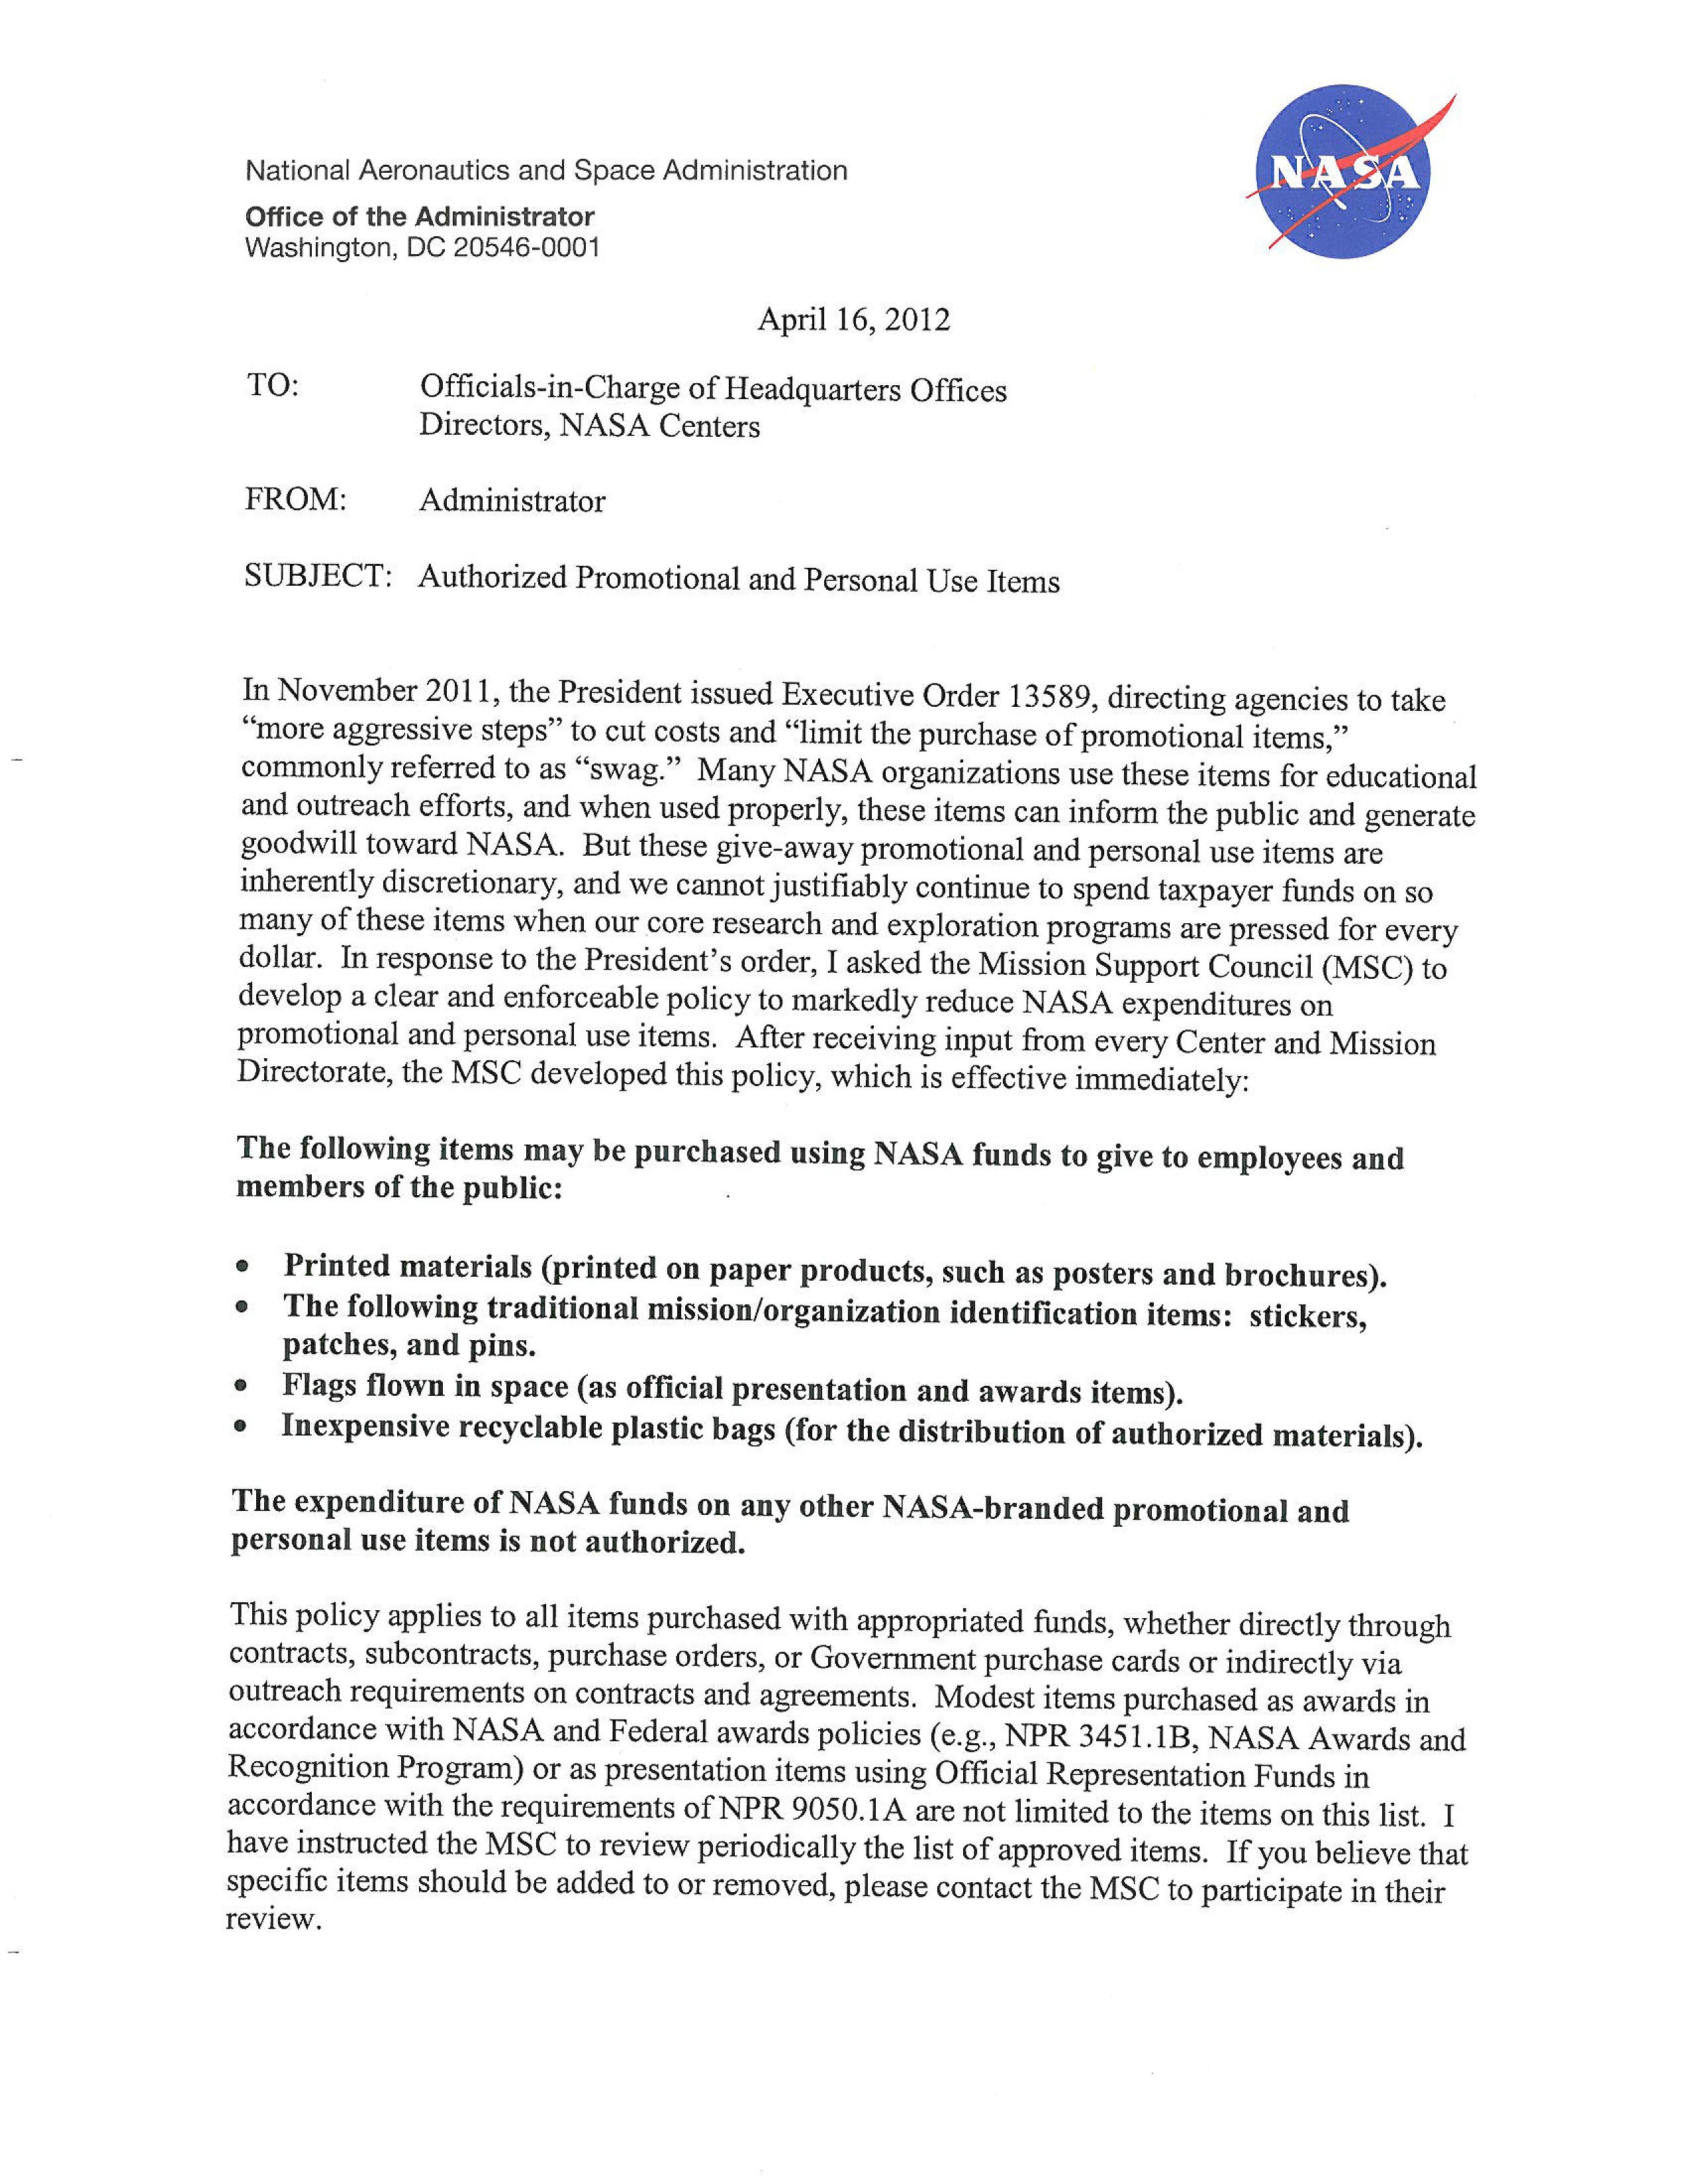 Image shows page 1 of the NASA Personal Property Disposal Procedural Requirements memo from the Office of the NASA Administrator dated April 16, 2012.